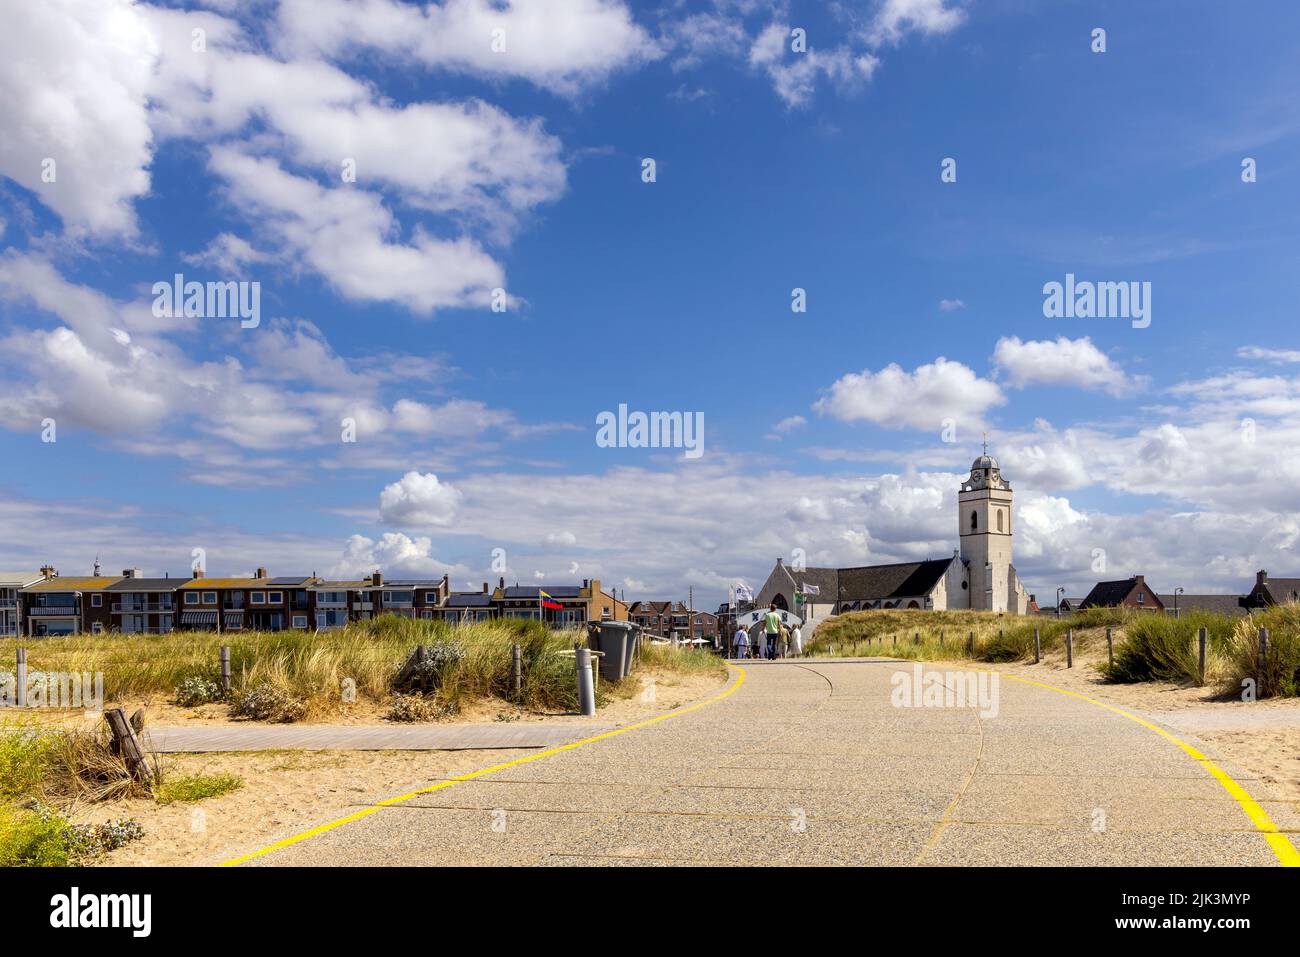 View of Andreaskerk (Andrew's Church ) situated at the seafront and local landmark in Katwijk, South Holland, The Netherlands. Stock Photo